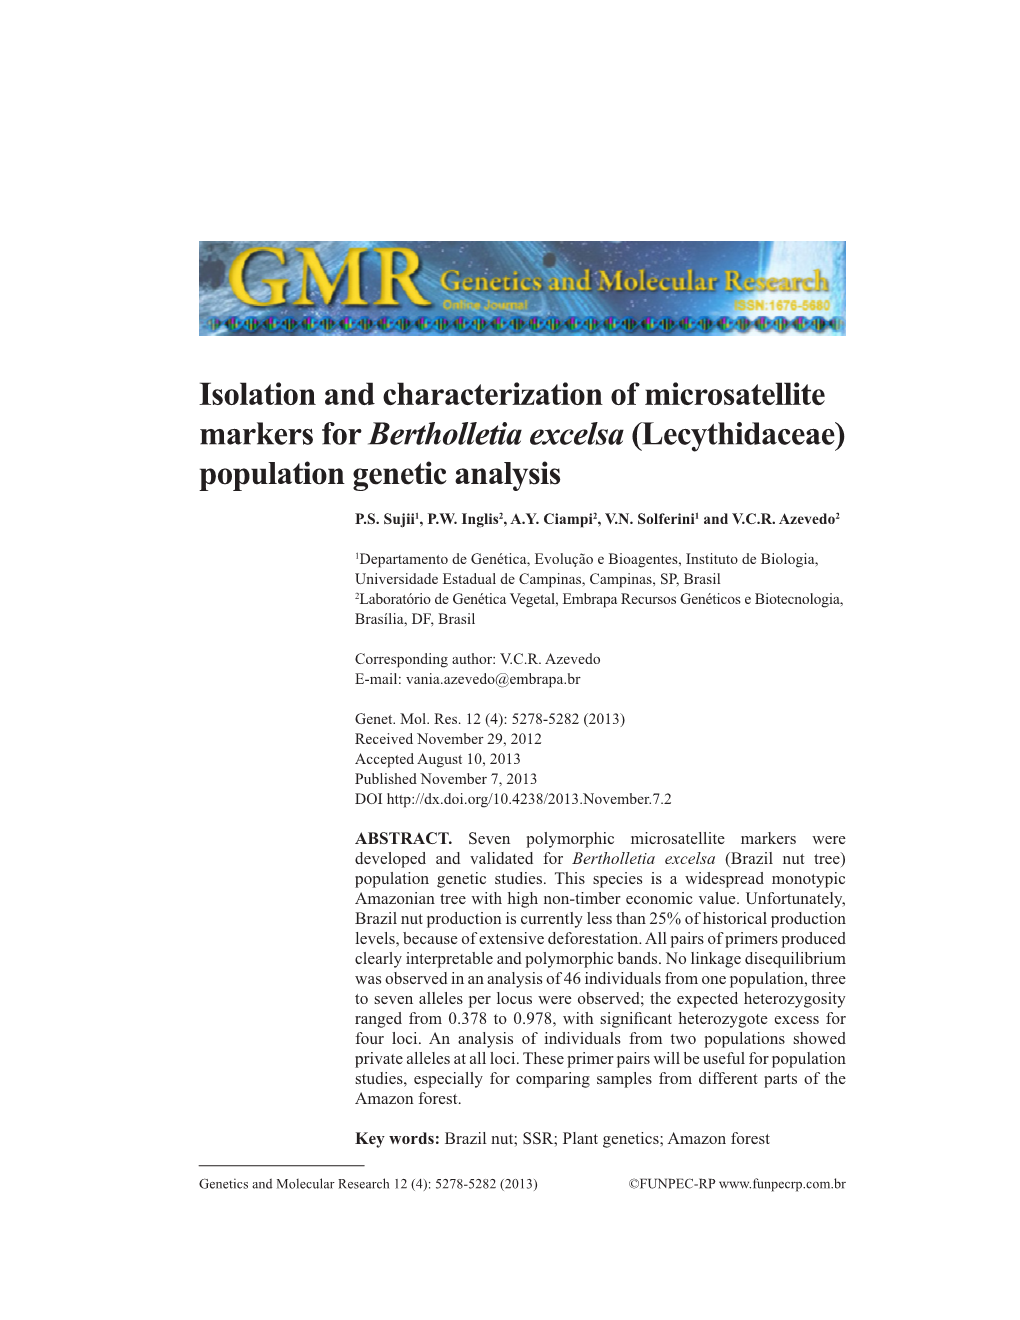 Isolation and Characterization of Microsatellite Markers for Bertholletia Excelsa (Lecythidaceae) Population Genetic Analysis